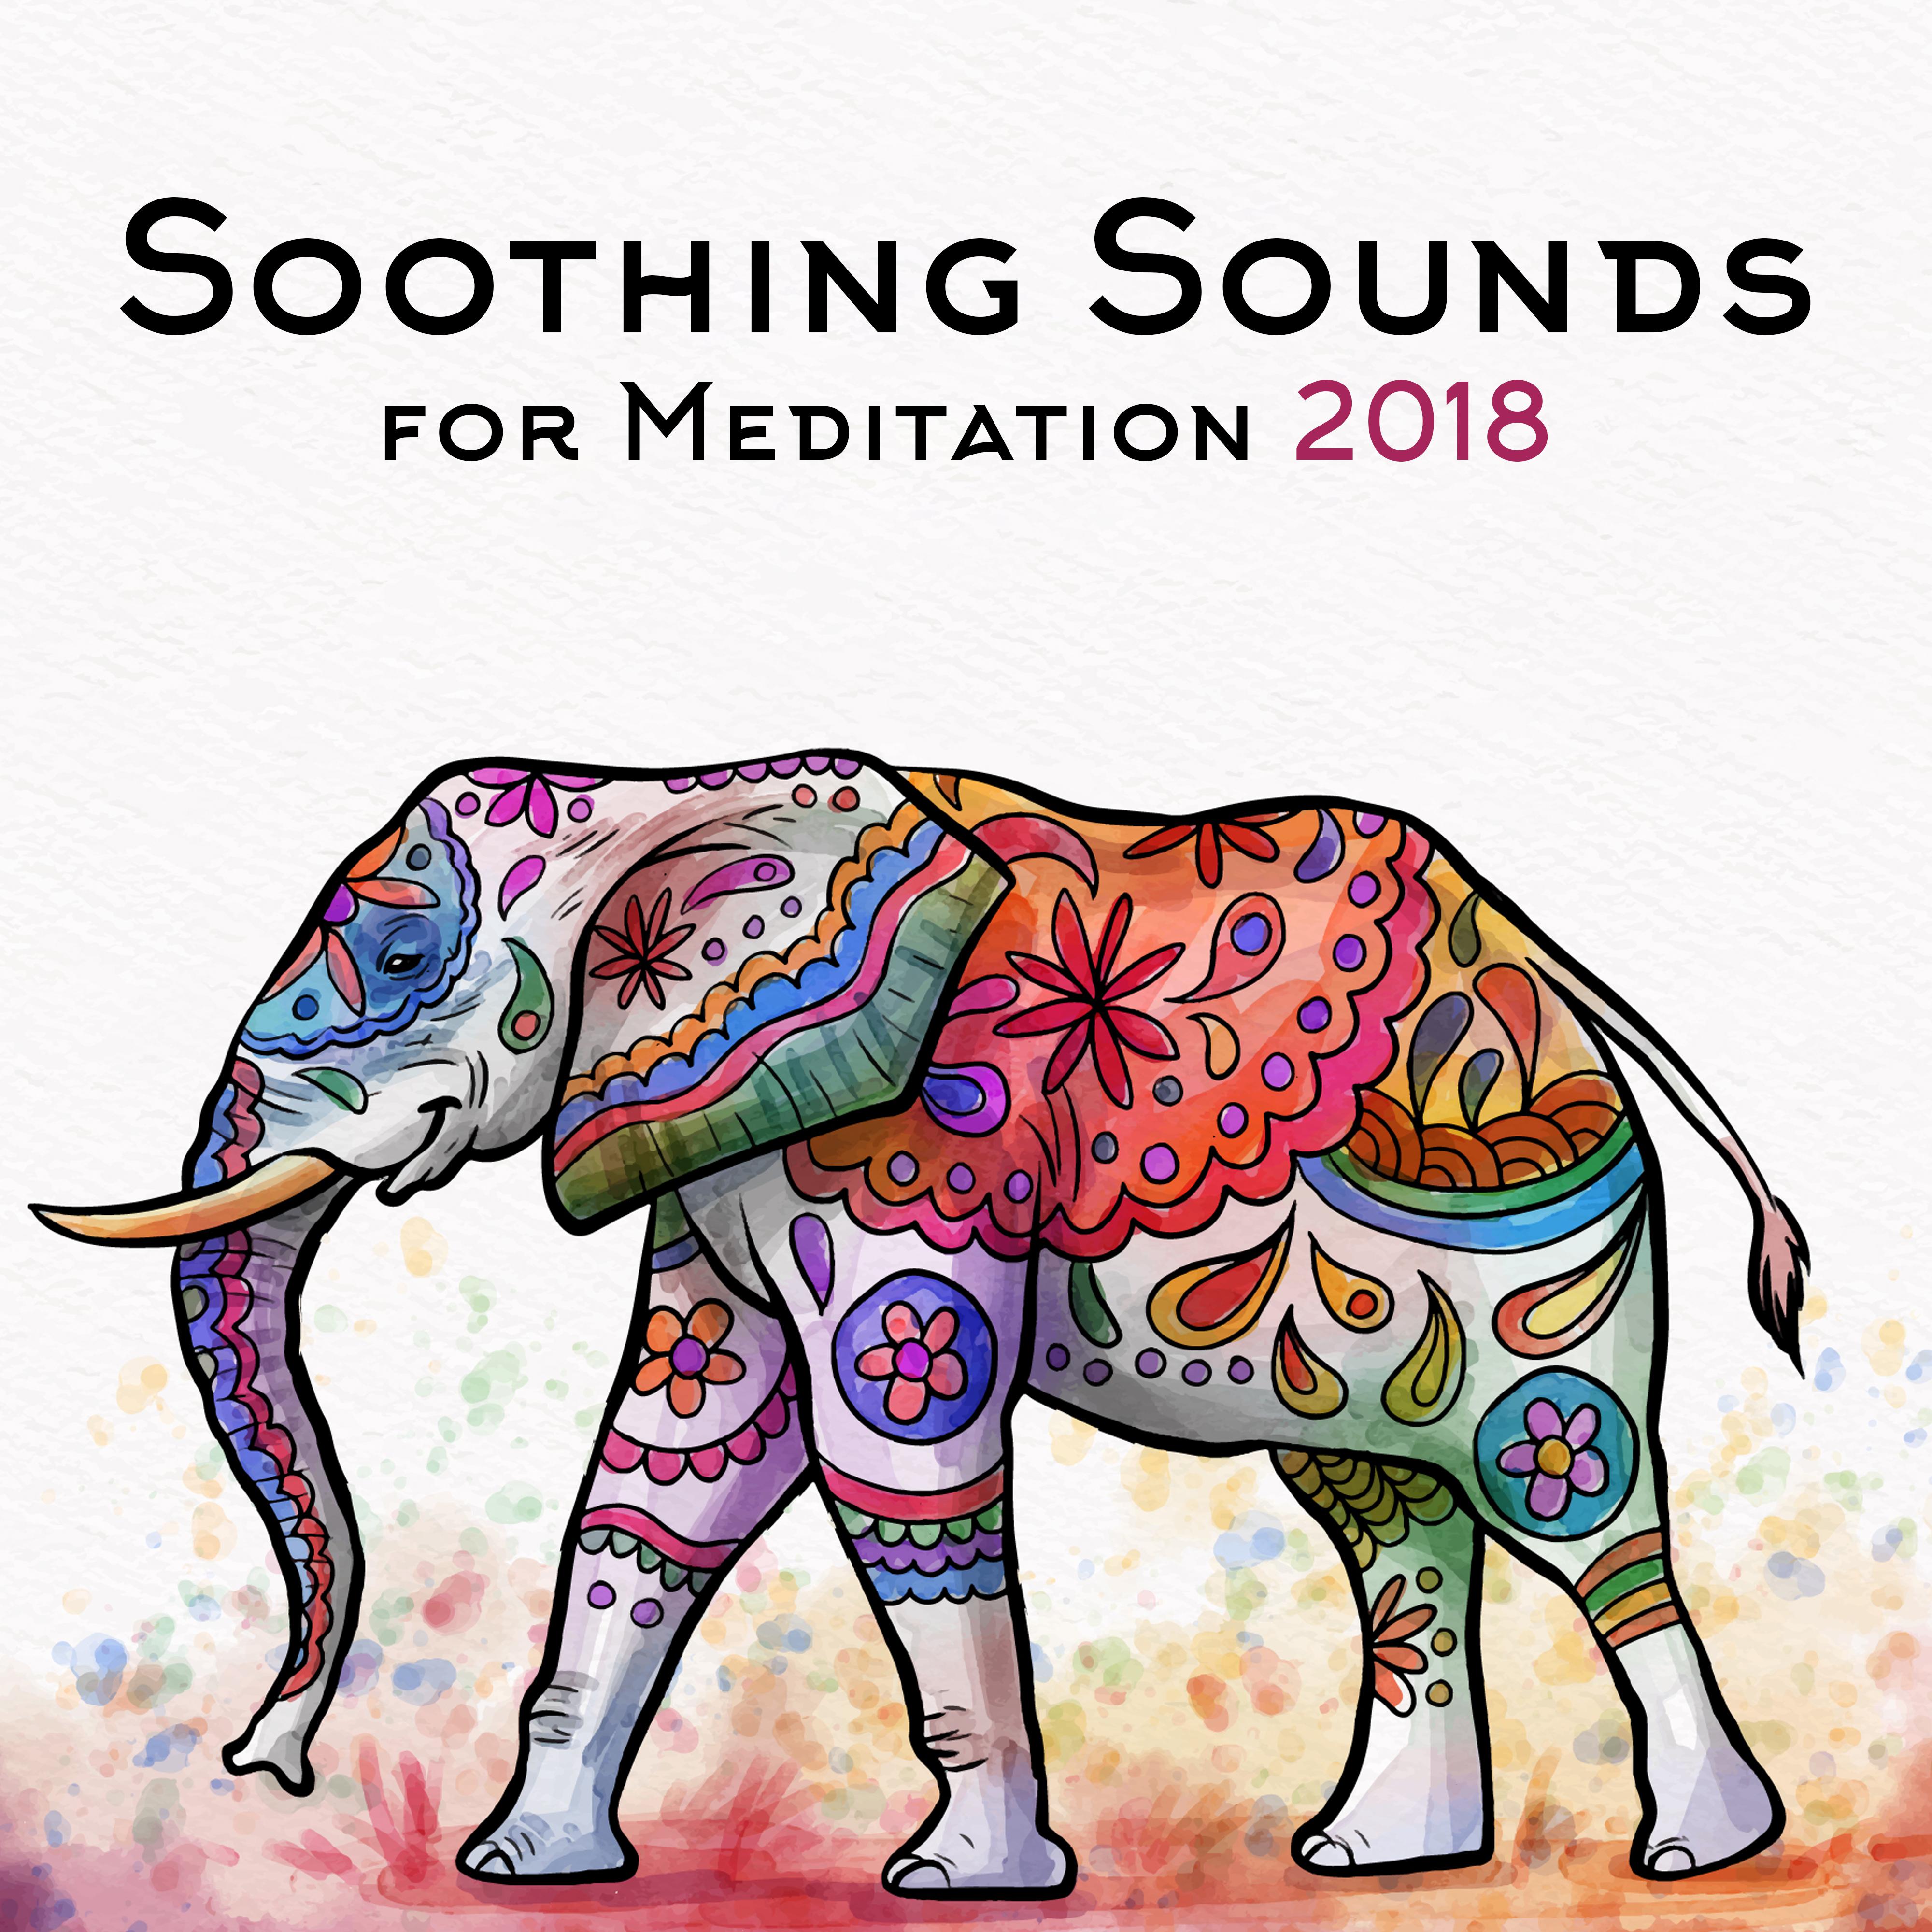 Soothing Sounds for Meditation 2018